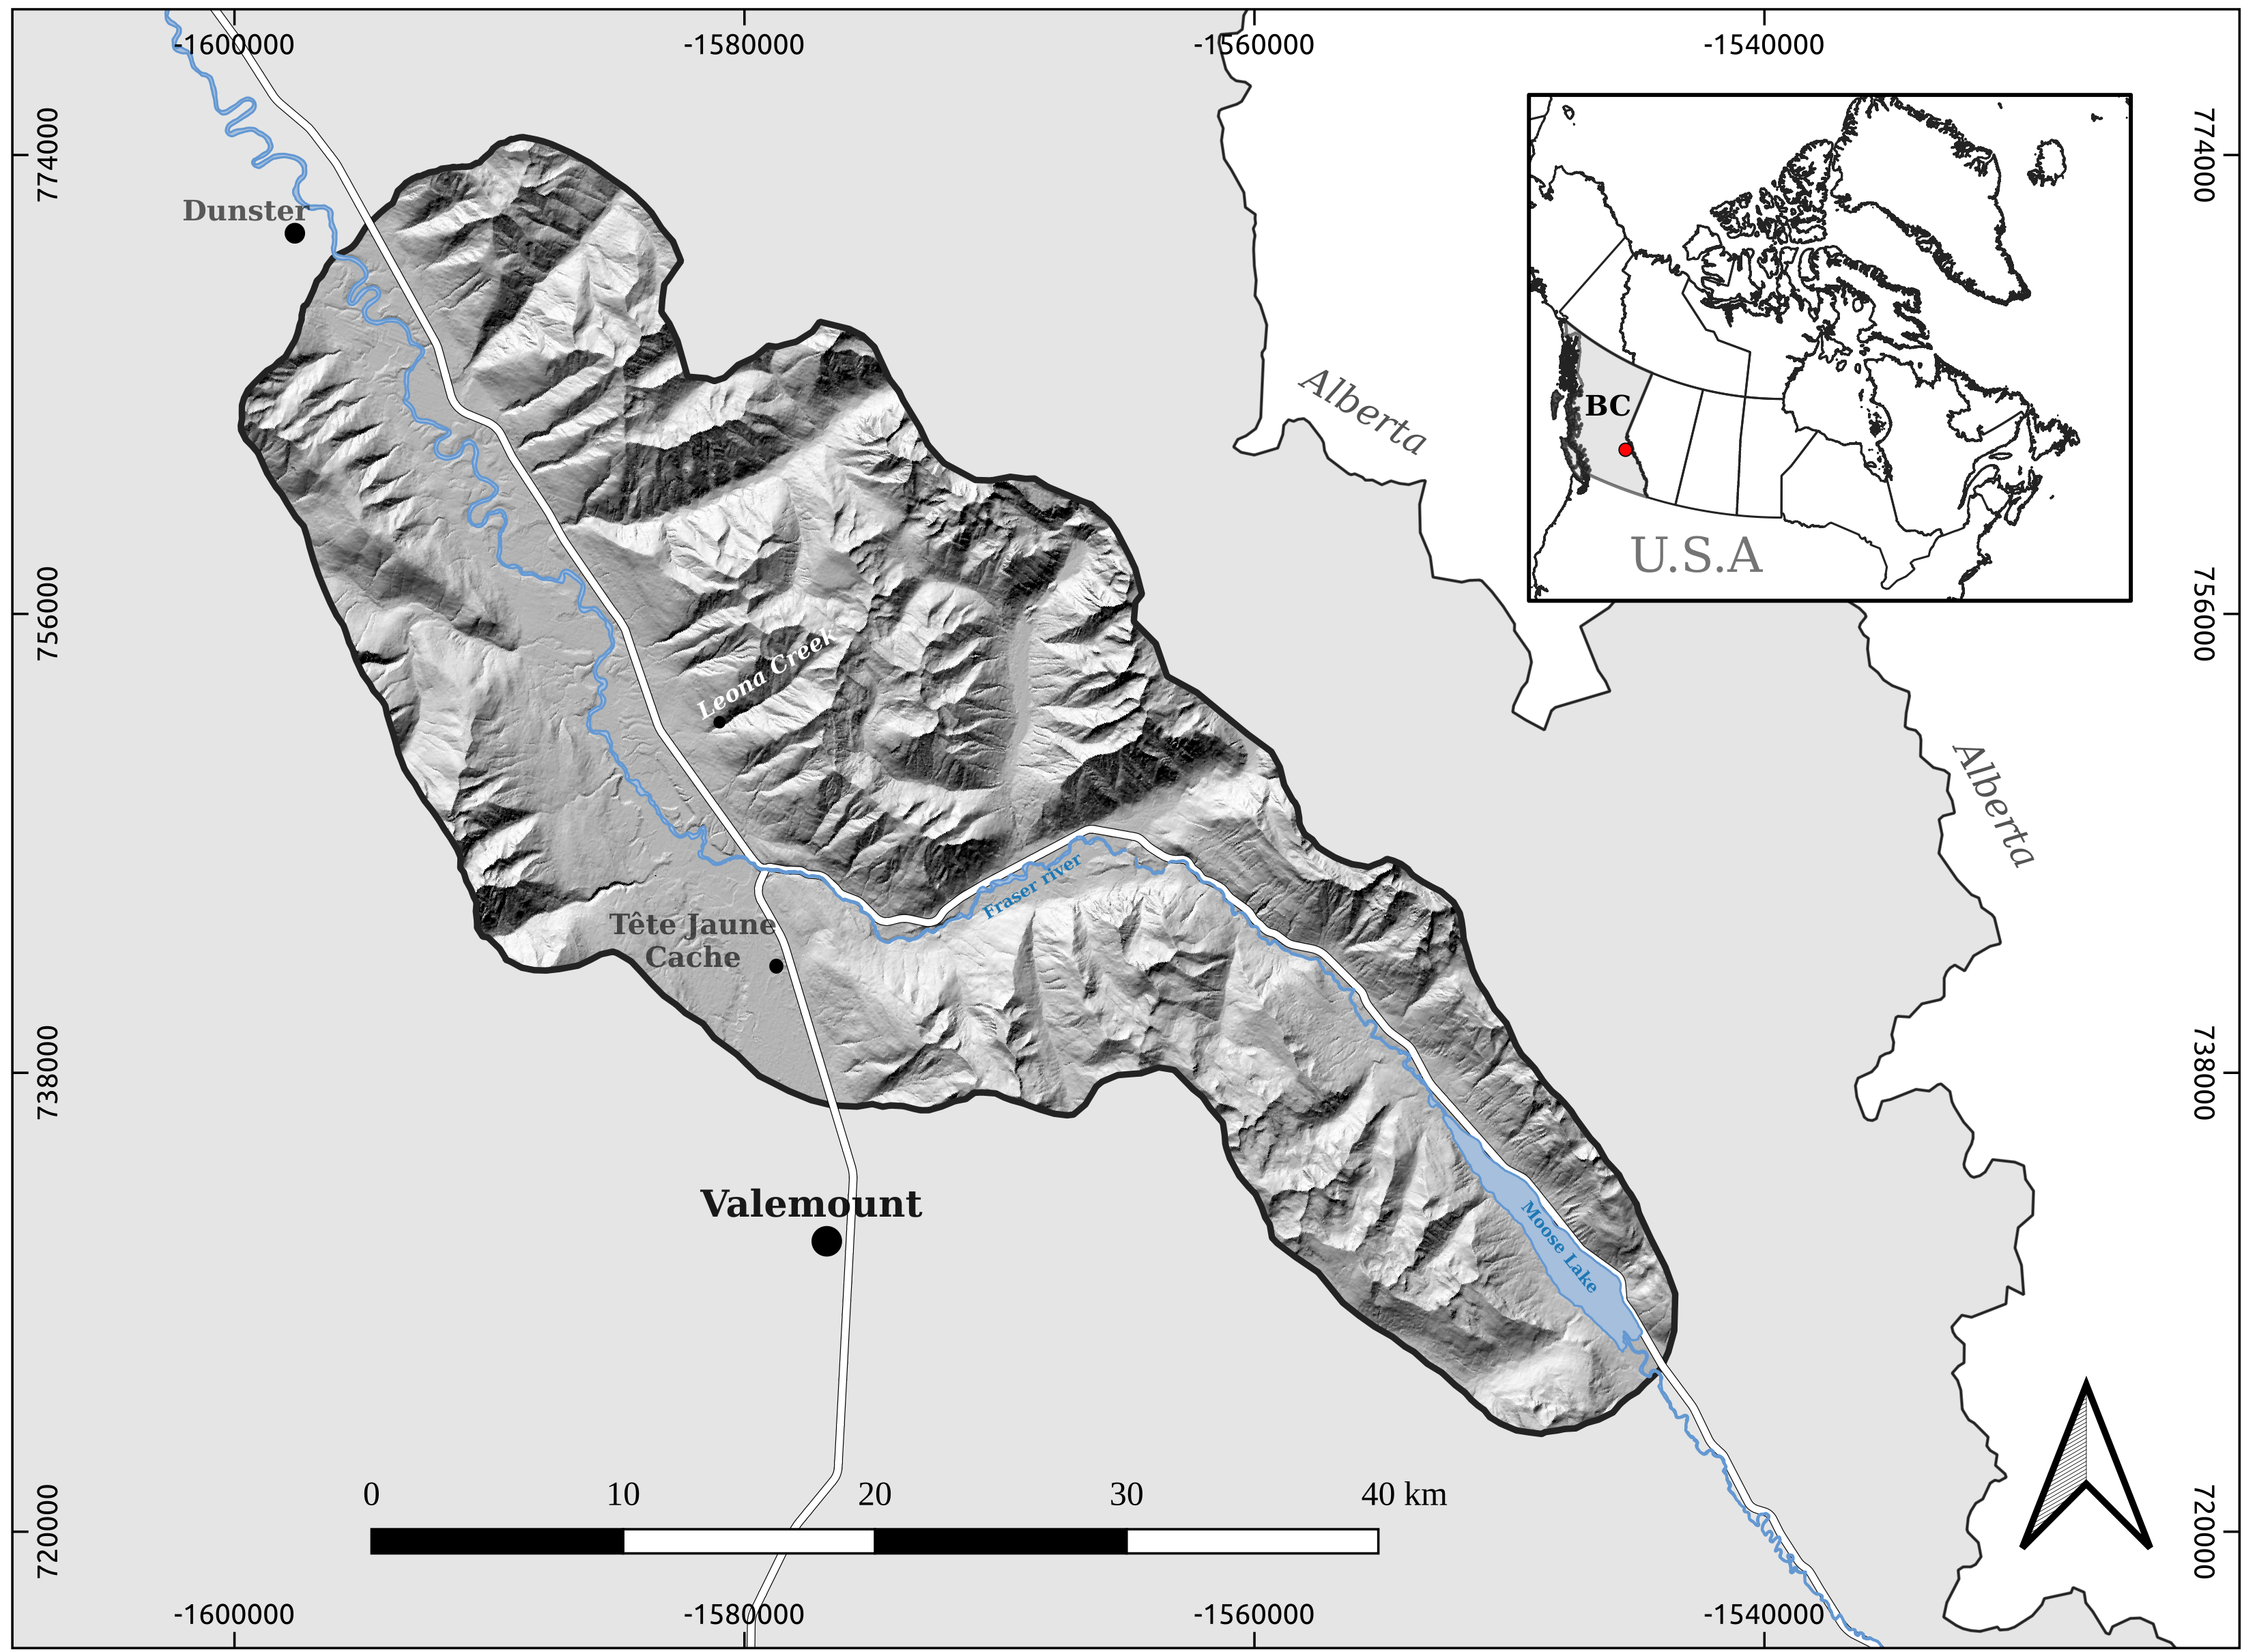 ../../_images/STUDENTSPROJECTS_Proj_2022_Matera_Modeling_debris_flow_source_areas_Txomin_Bornaetxea_3_0.png